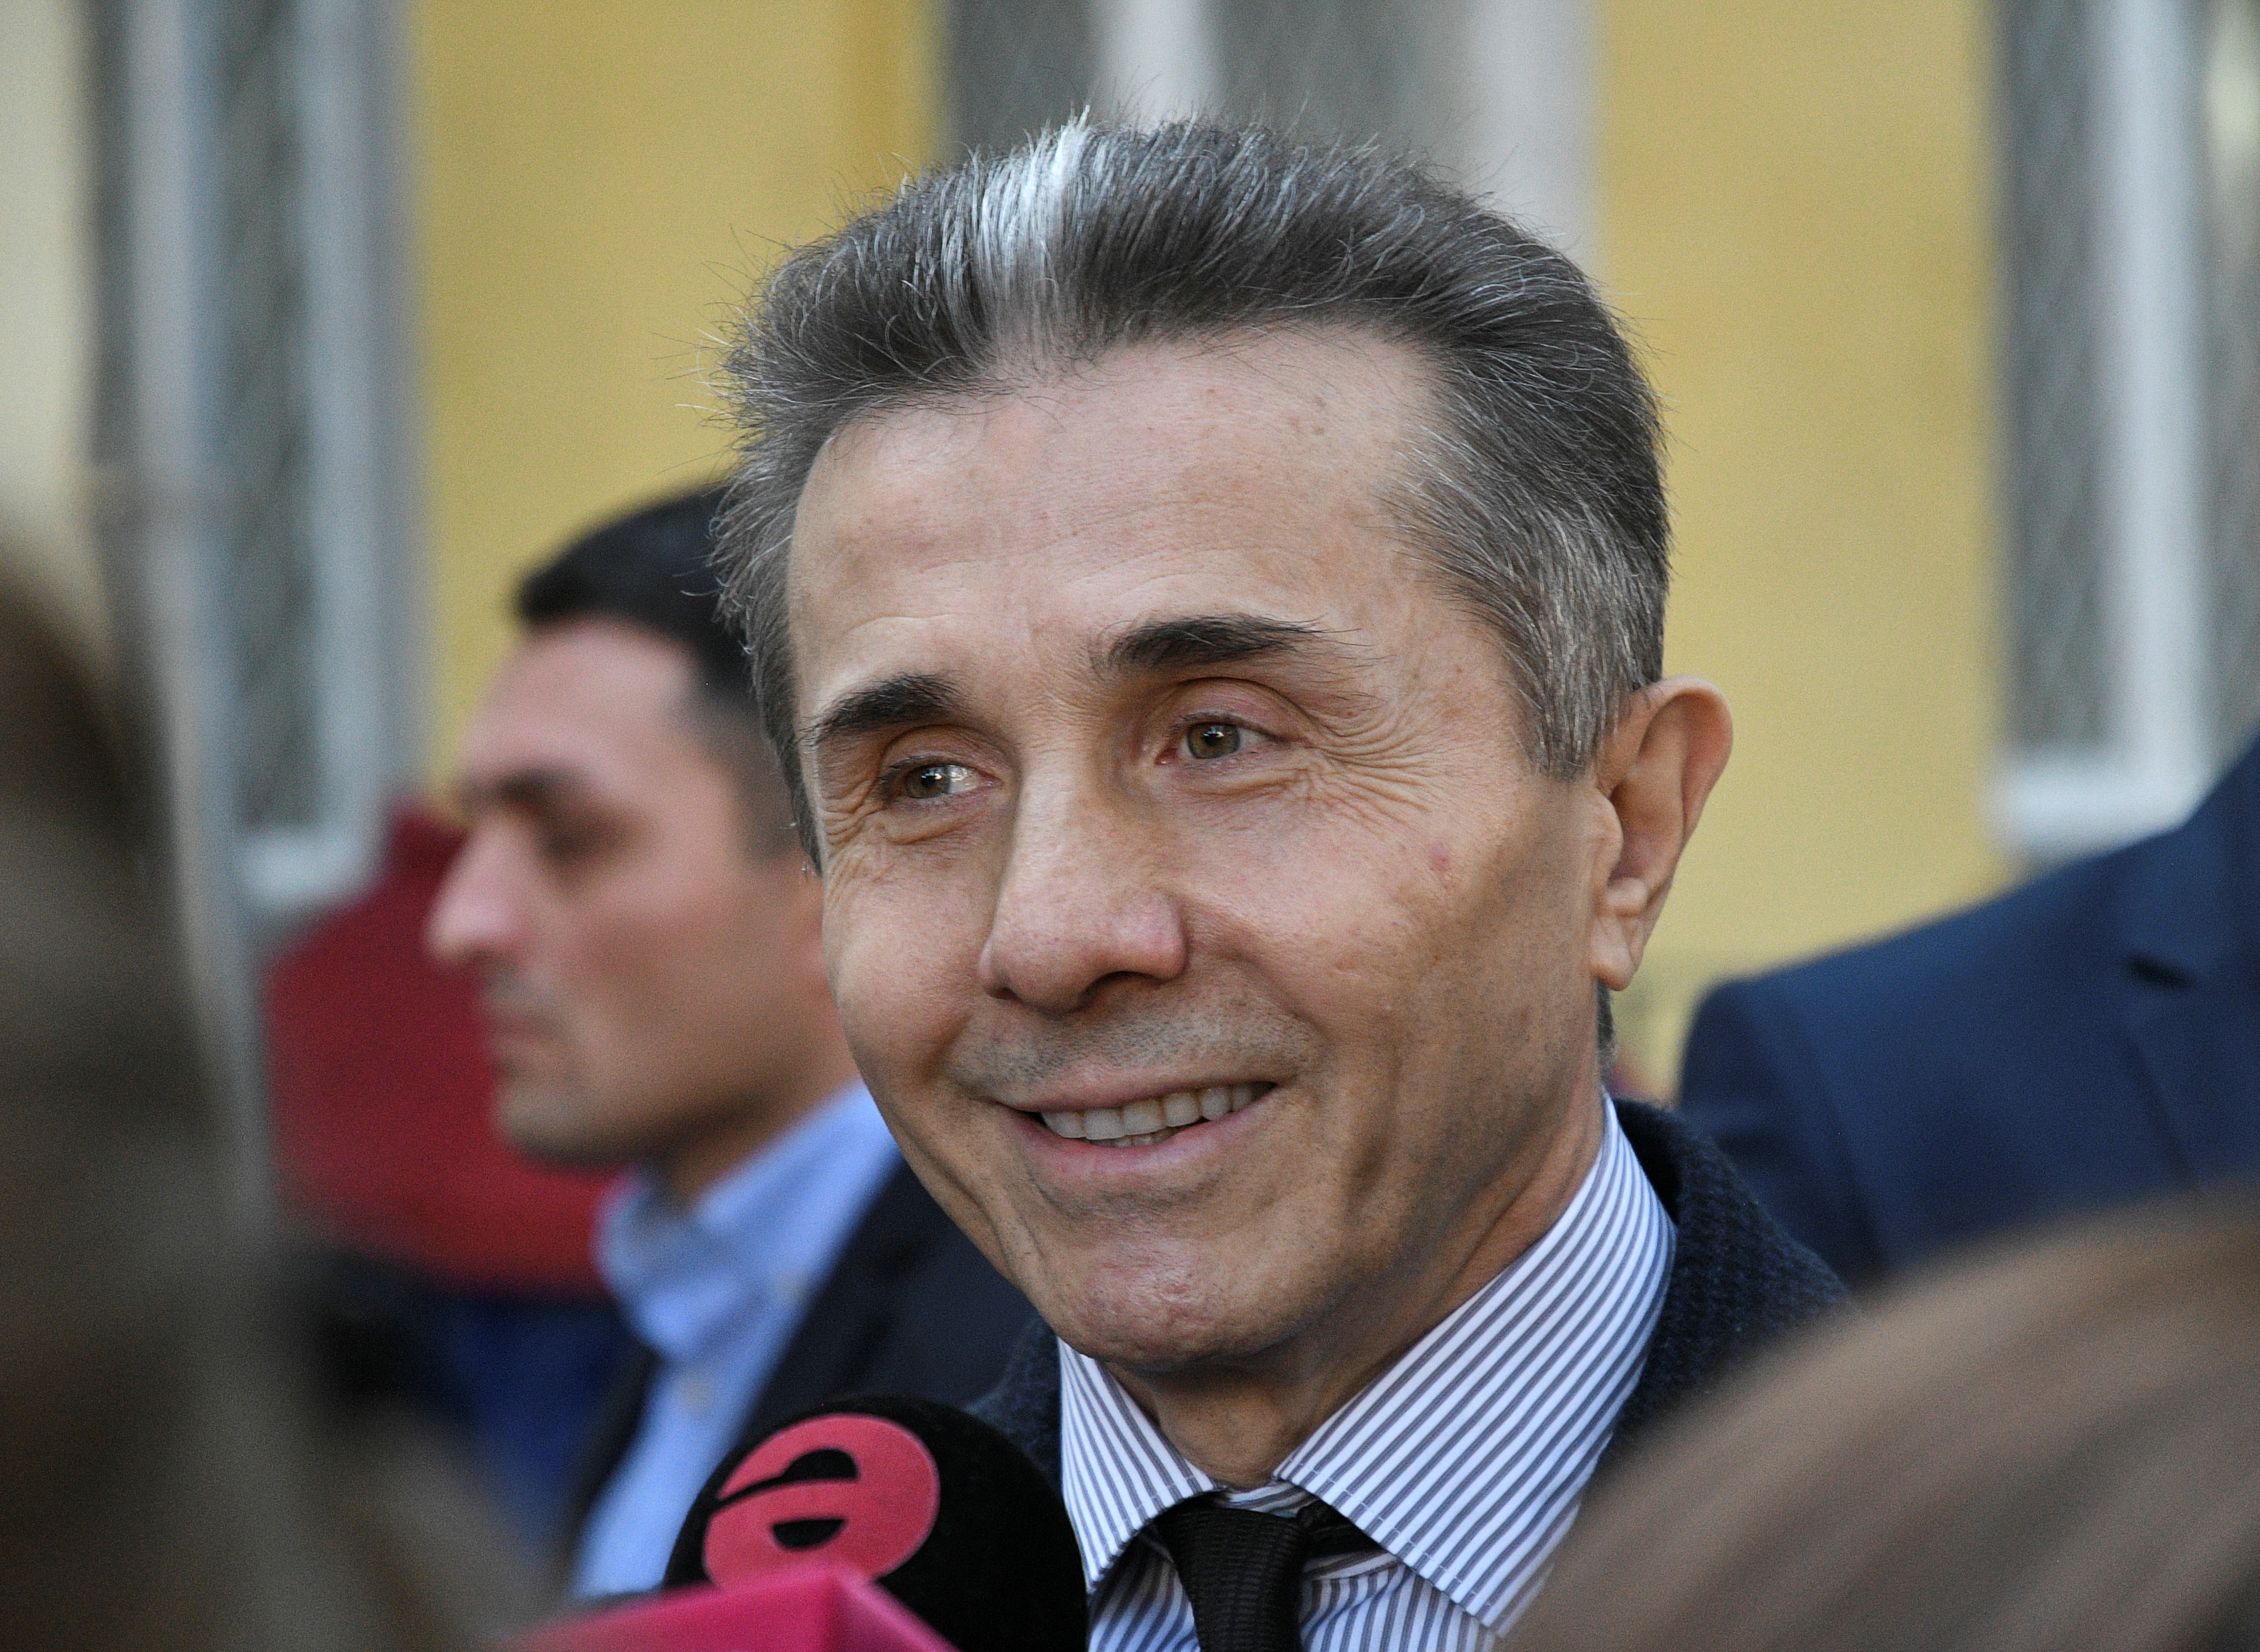 Georgia's former Prime Minister Ivanishvili visits a polling station during the presidential election in Tbilisi